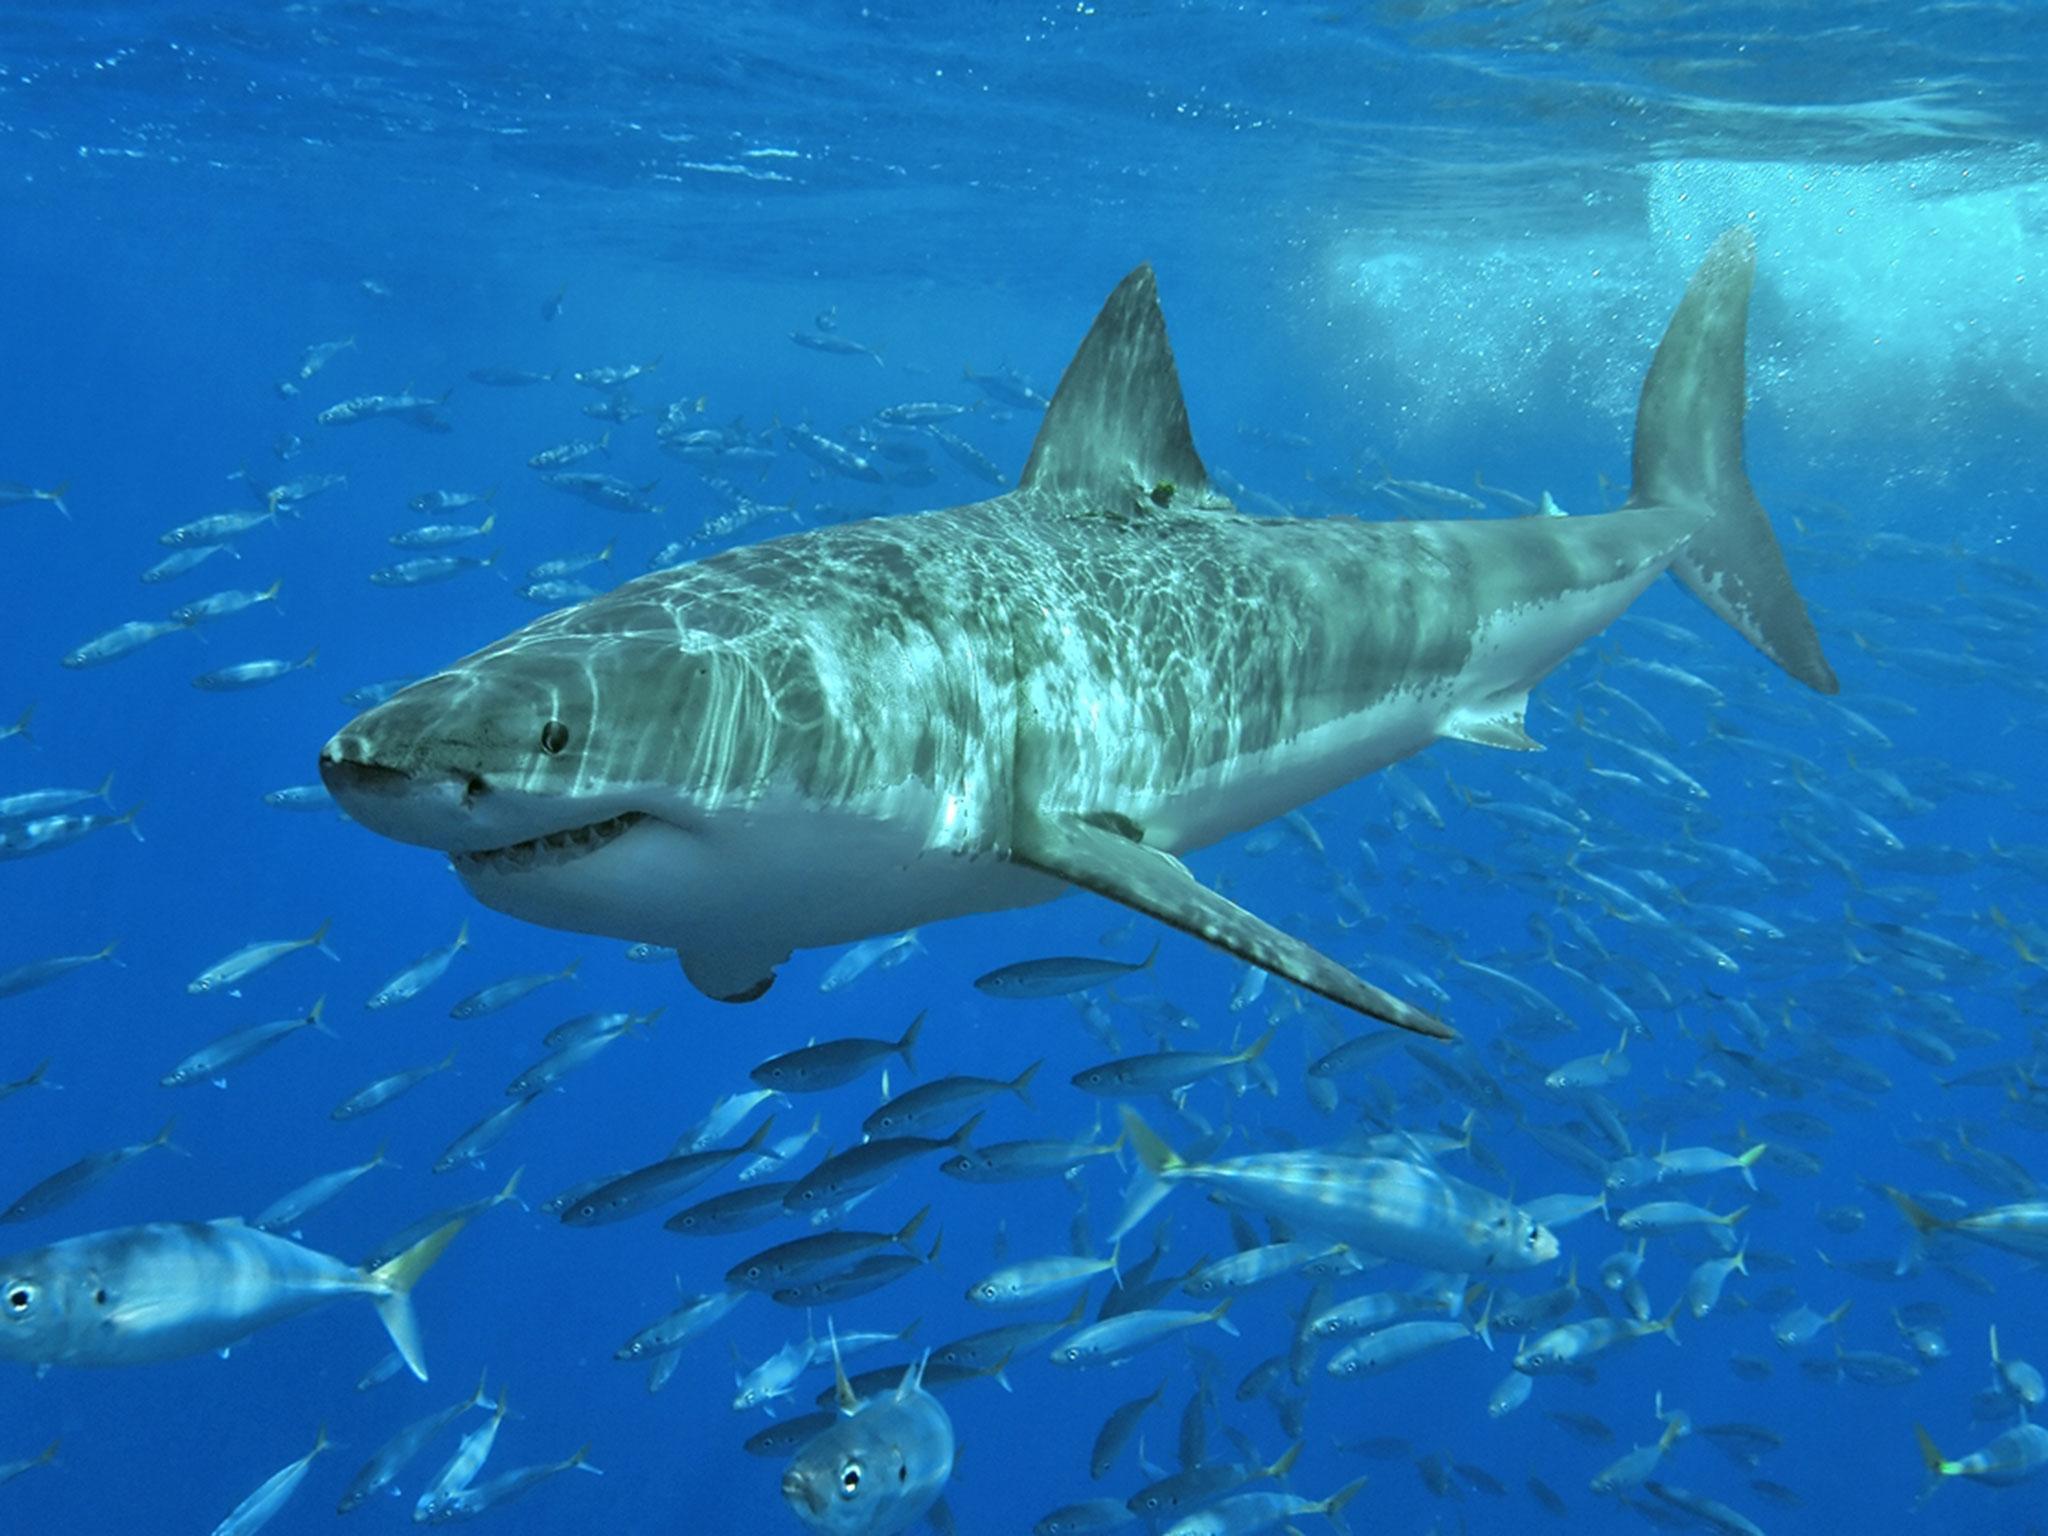 Researchers say building work and pollution is causing sharks to migrate closer to humans